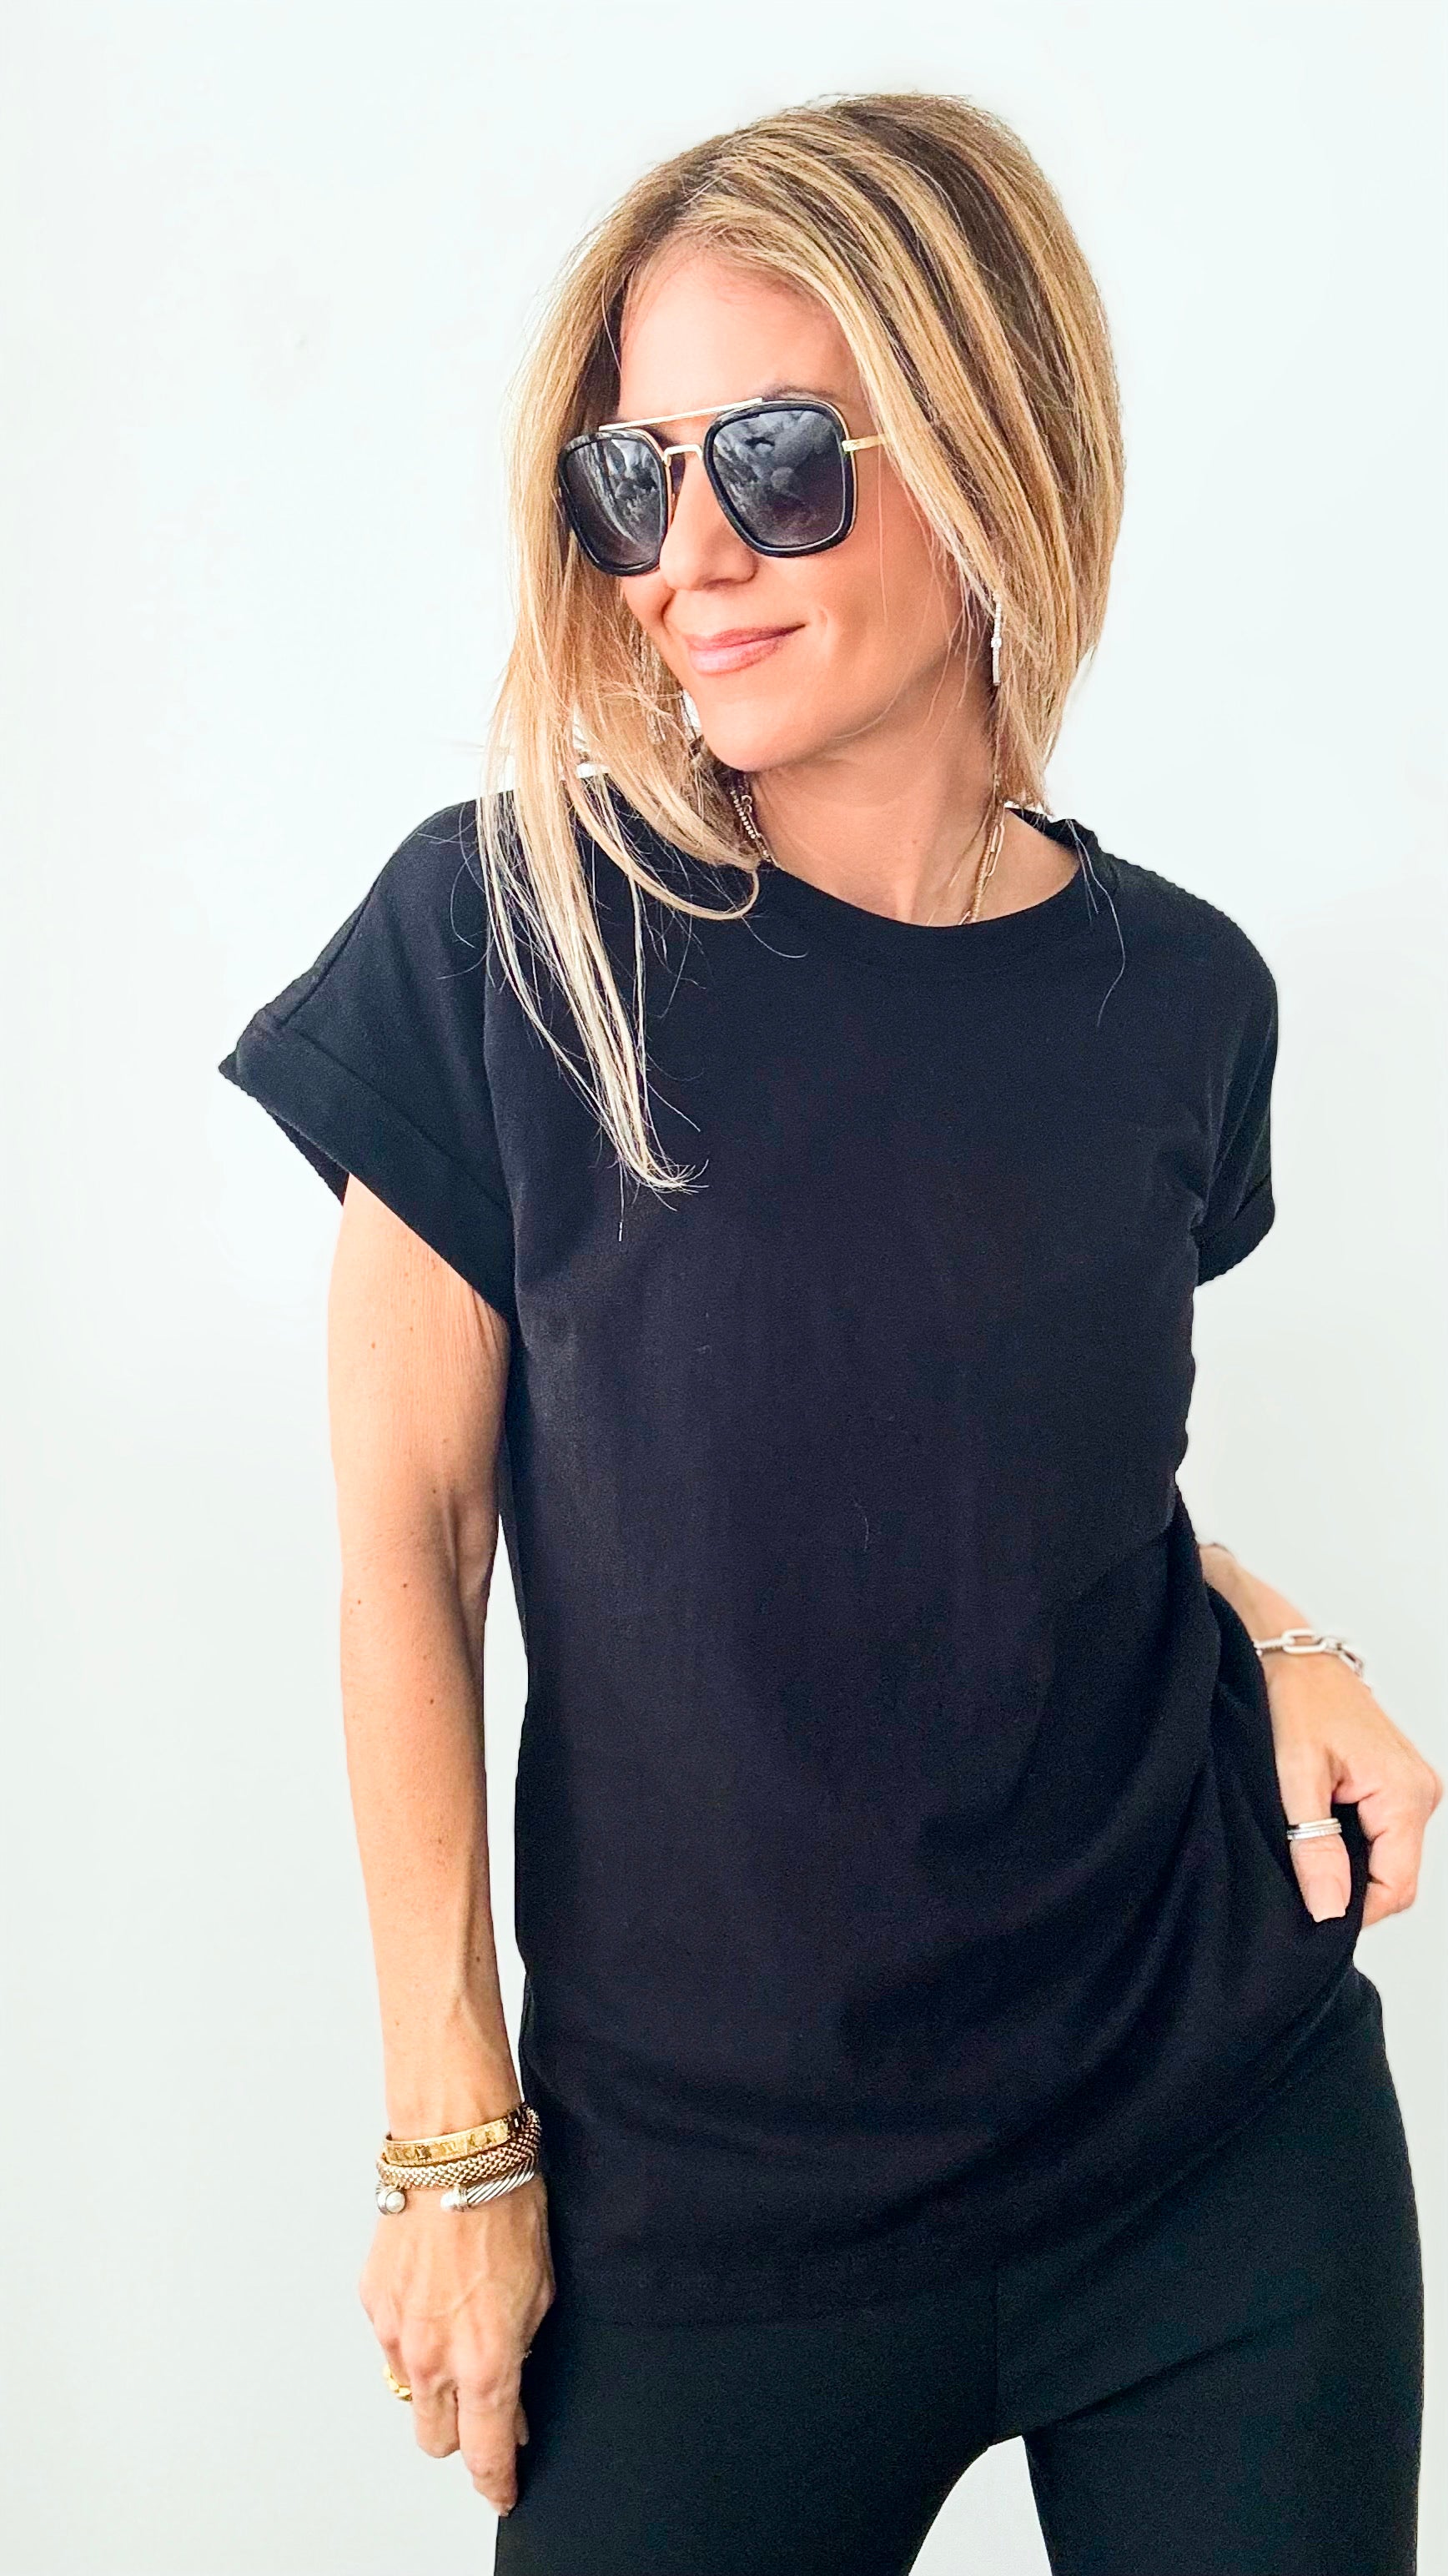 Cotton Crew Girl Next Door - Black-110 Short Sleeve Tops-Zenana-Coastal Bloom Boutique, find the trendiest versions of the popular styles and looks Located in Indialantic, FL